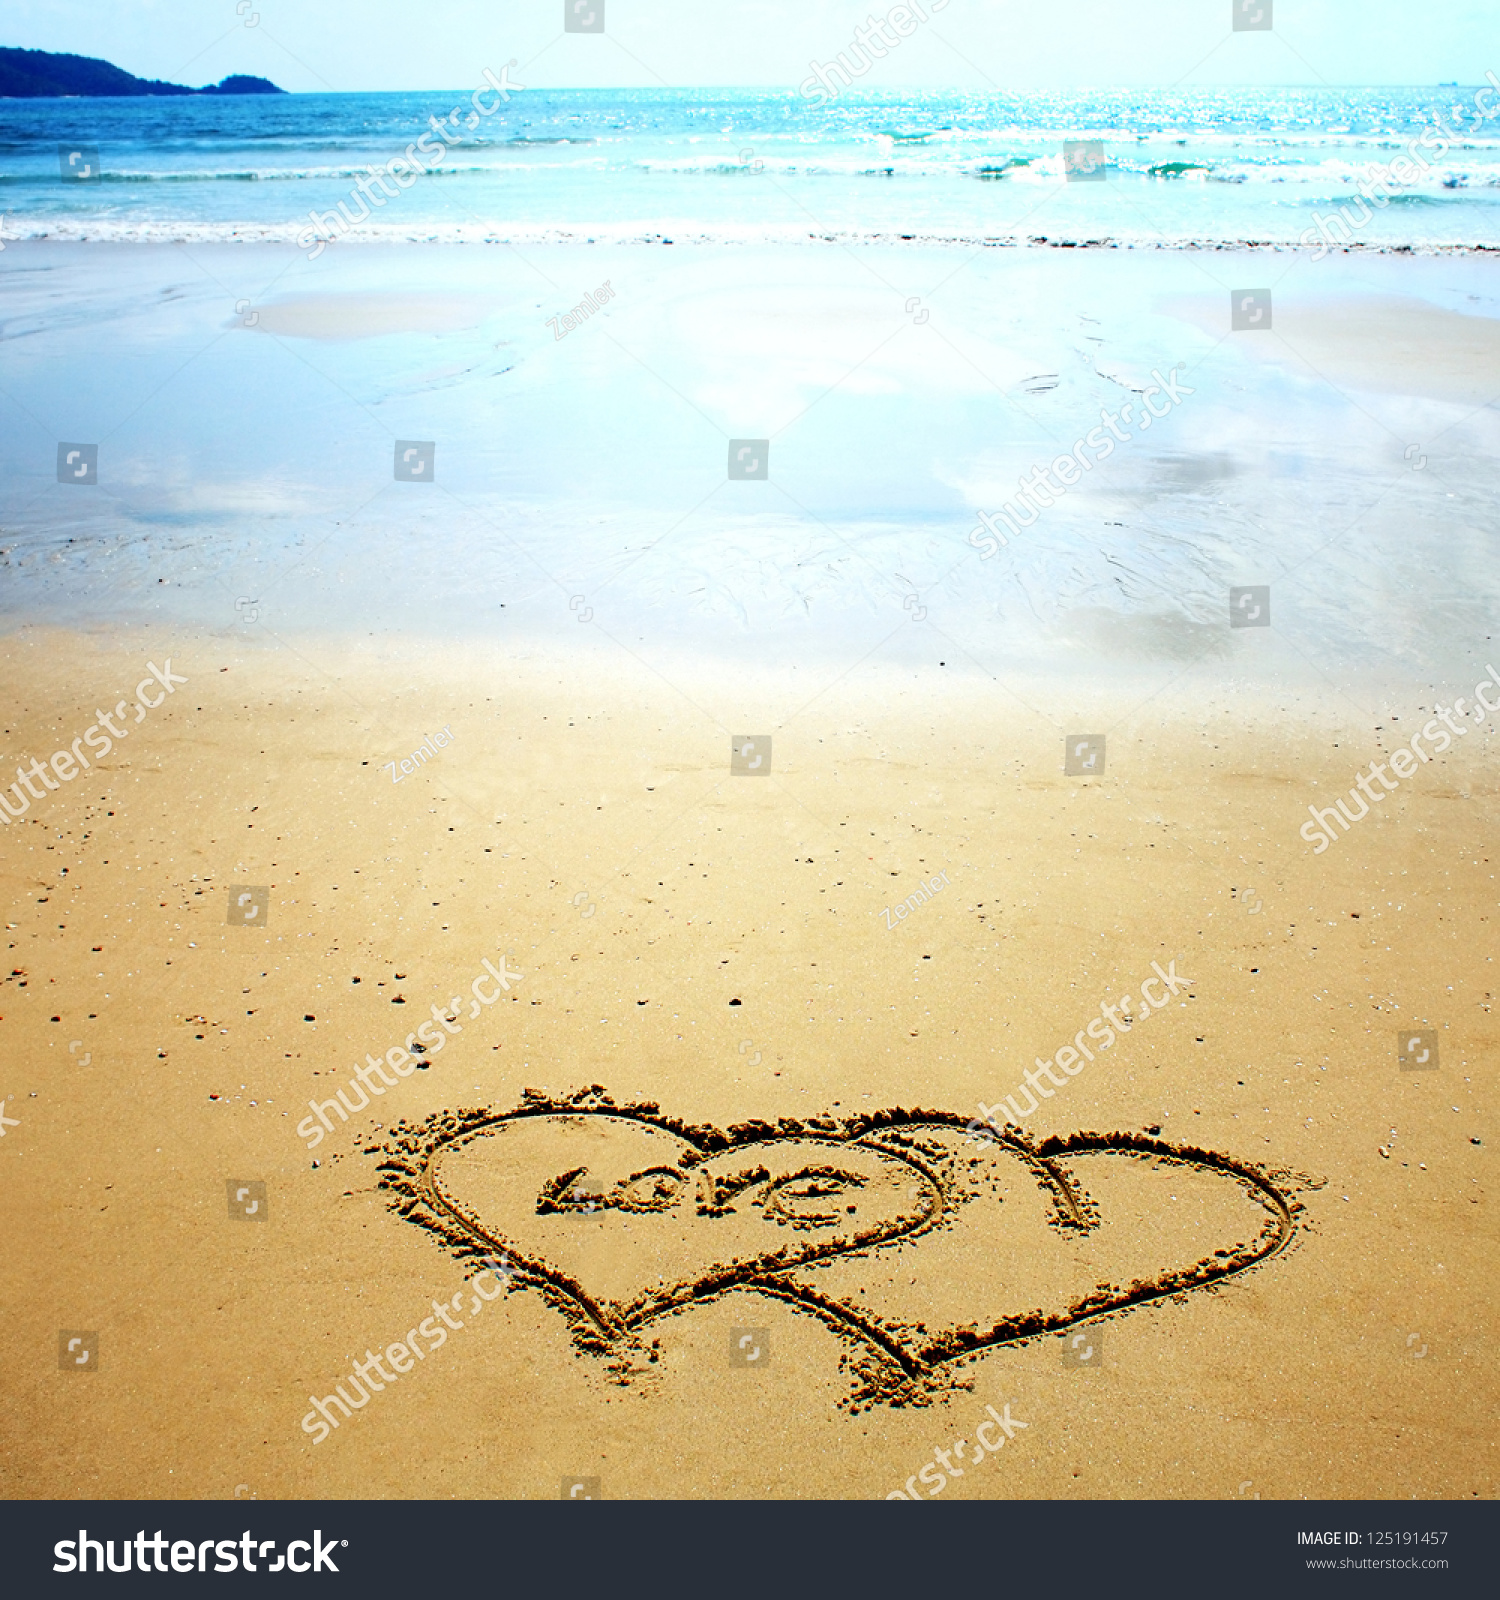 Two Hearts Drawn In The Sand On The Beach. Romantic Design Element ...